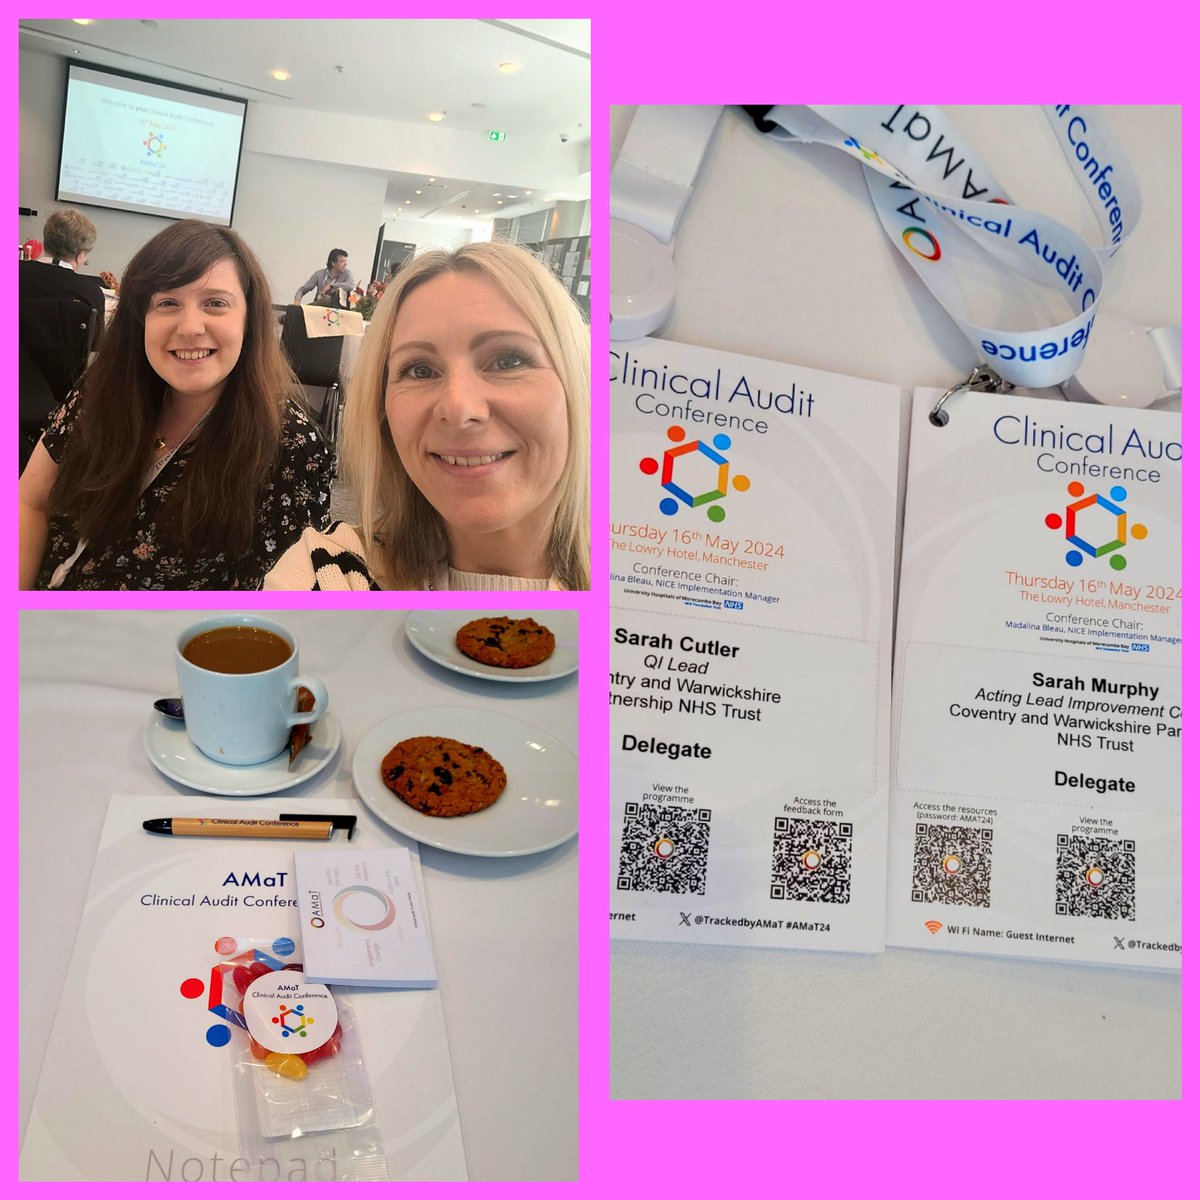 We've sent our two Sarah's to the Lowry Hotel in Manchester for the #ClinicalAudit Conference #AMaT24 today for #audit #governance and #improvement talks & training 📈 Hope you all have a great day! 🤗 #Movement4Improvement #Creative🩷#Courage🩷#Curious🩷 #QI #NHS